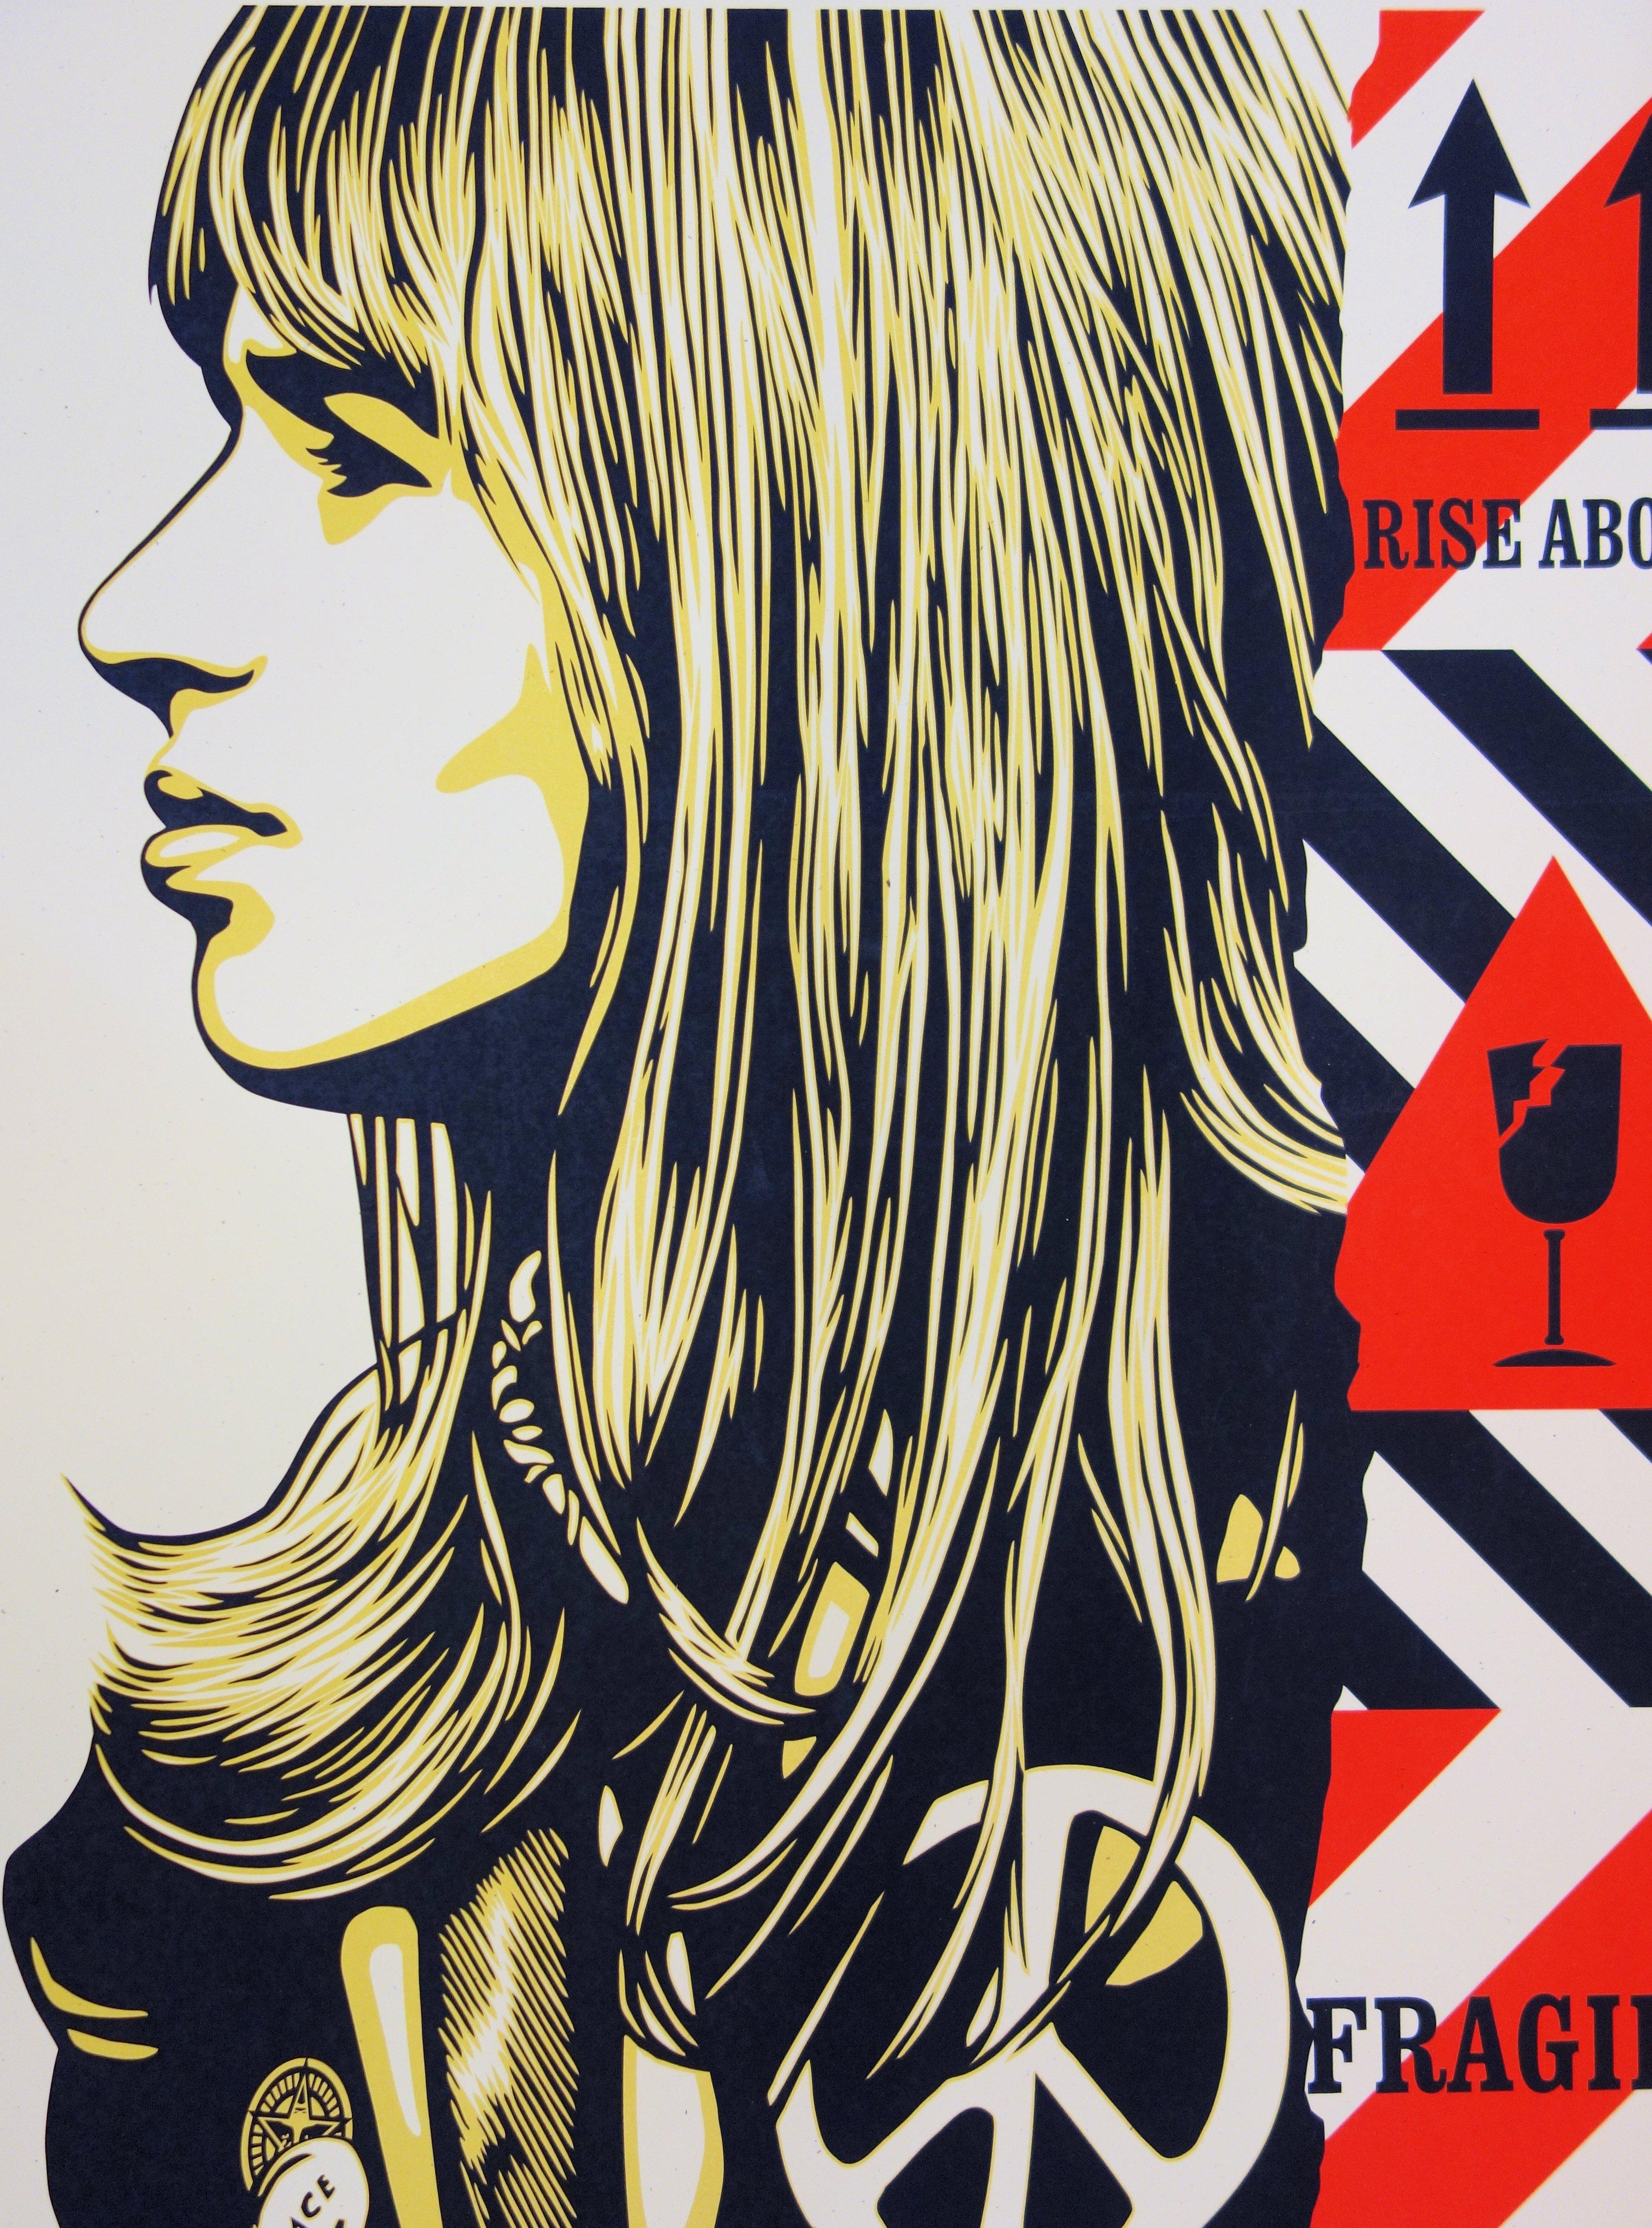 Fragile Peace - Original Screen Print Handsigned and Numbered - Beige Figurative Print by Shepard Fairey